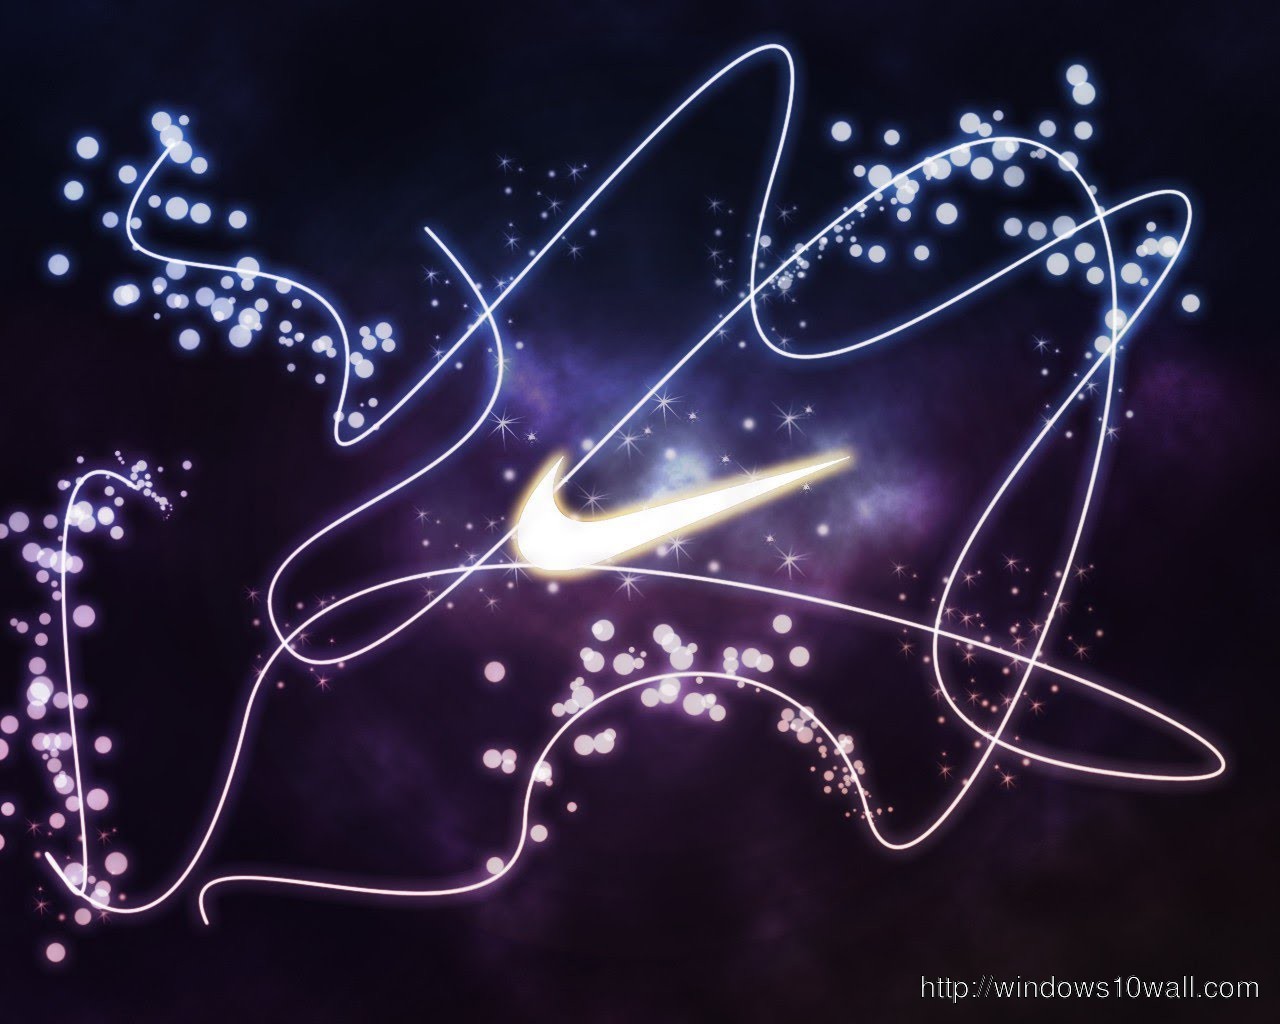 Free Download Nike Page 2 Windows 10 Wallpapers 1280x1024 For Your Desktop Mobile Tablet Explore 75 Nike Sign Wallpaper Free Nike Wallpaper Nike Hd Wallpaper Black Nike Wallpaper